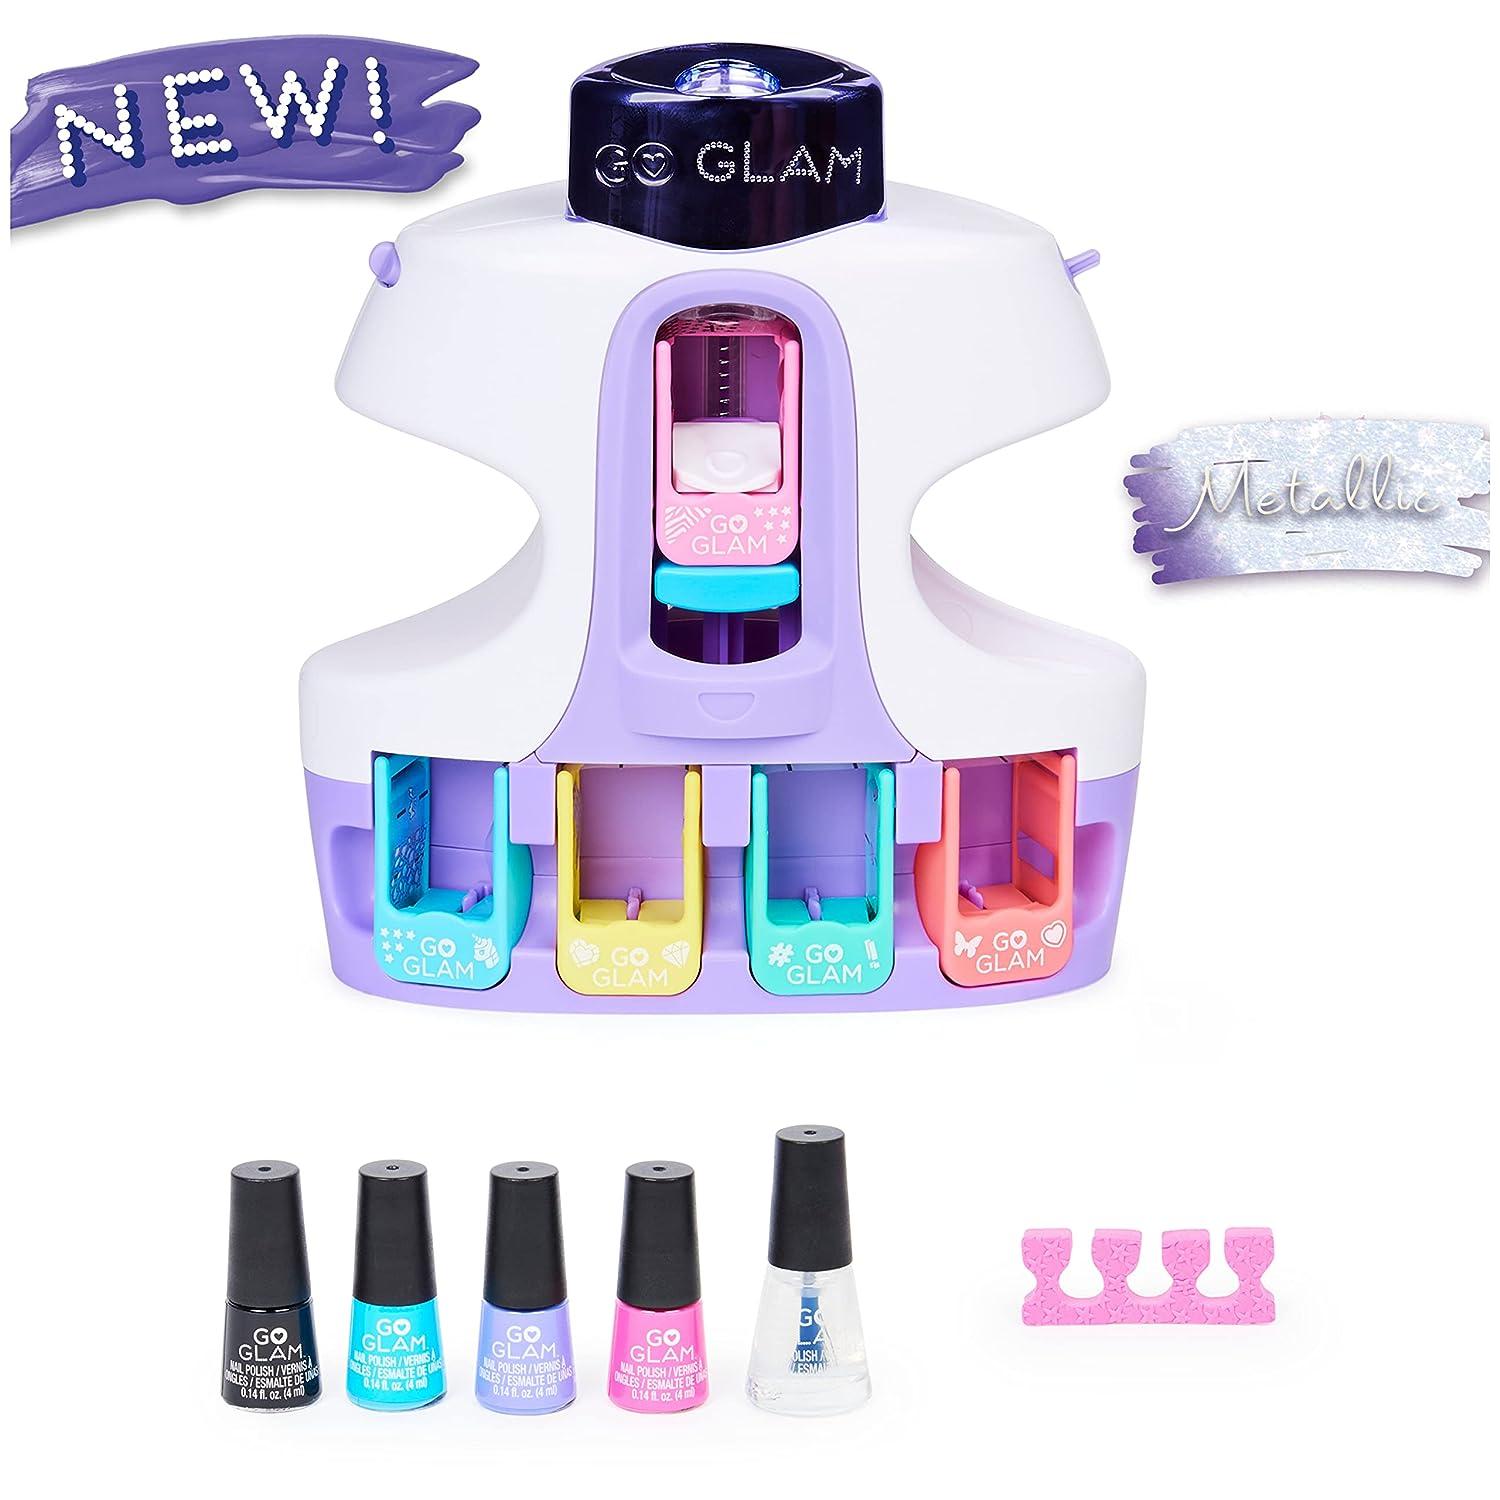 Recharge Cool Maker Go Glam Nail Studio + Fashion Pack